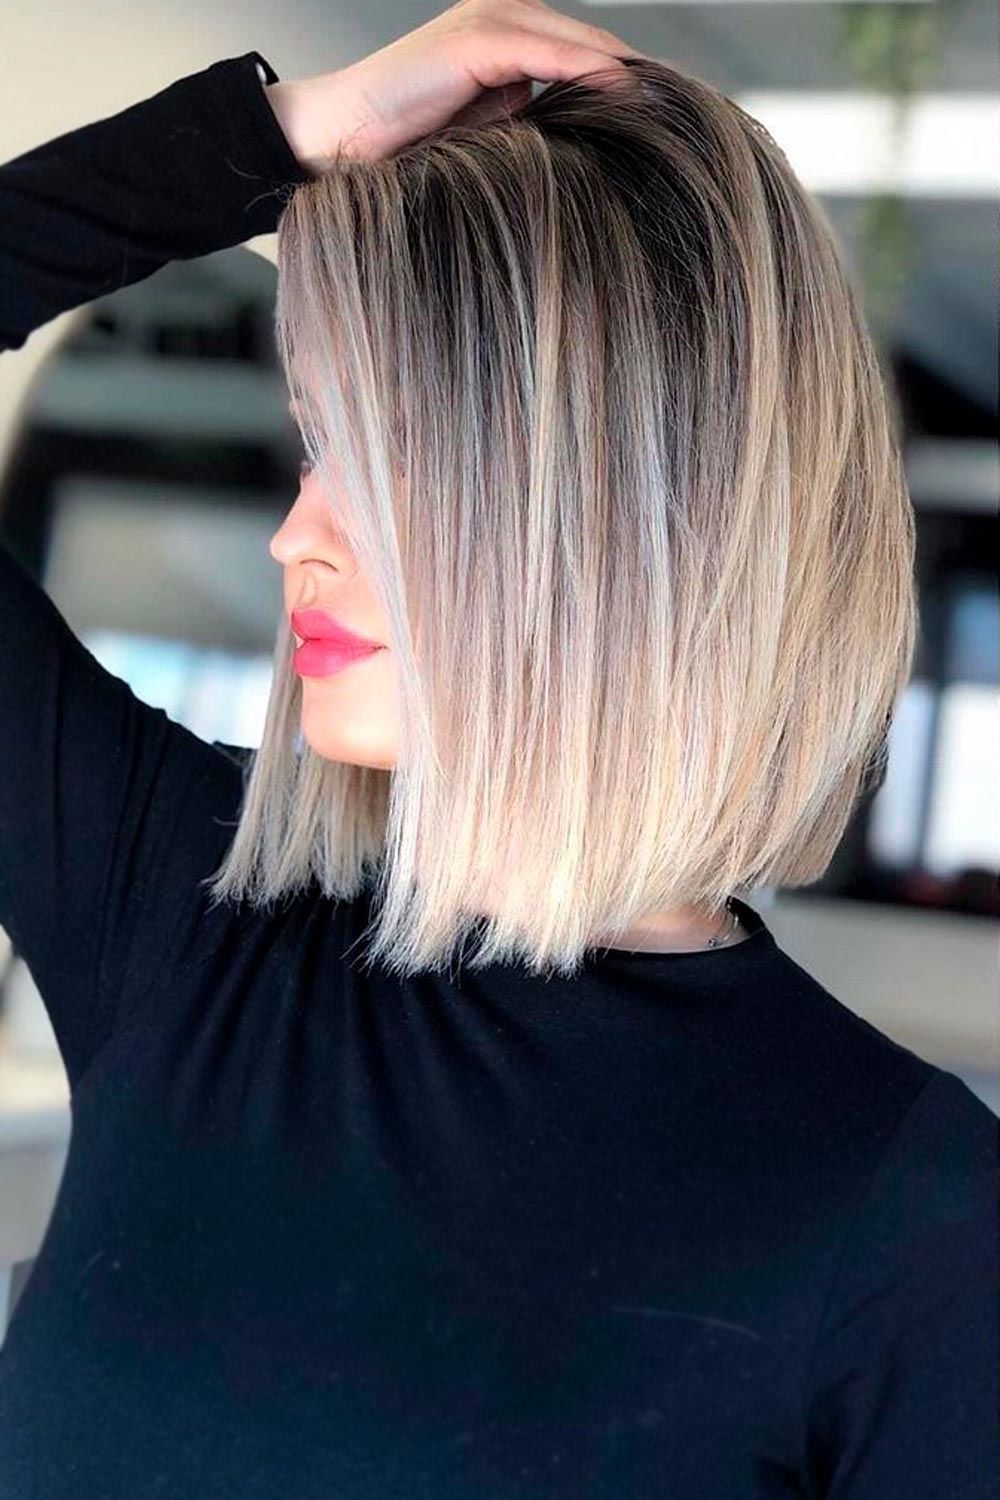 20 Blunt Bob Hairstyles To Wear This Season – Lovehairstyles Inside Recent Classy Medium Blonde Bob Haircuts (View 7 of 25)